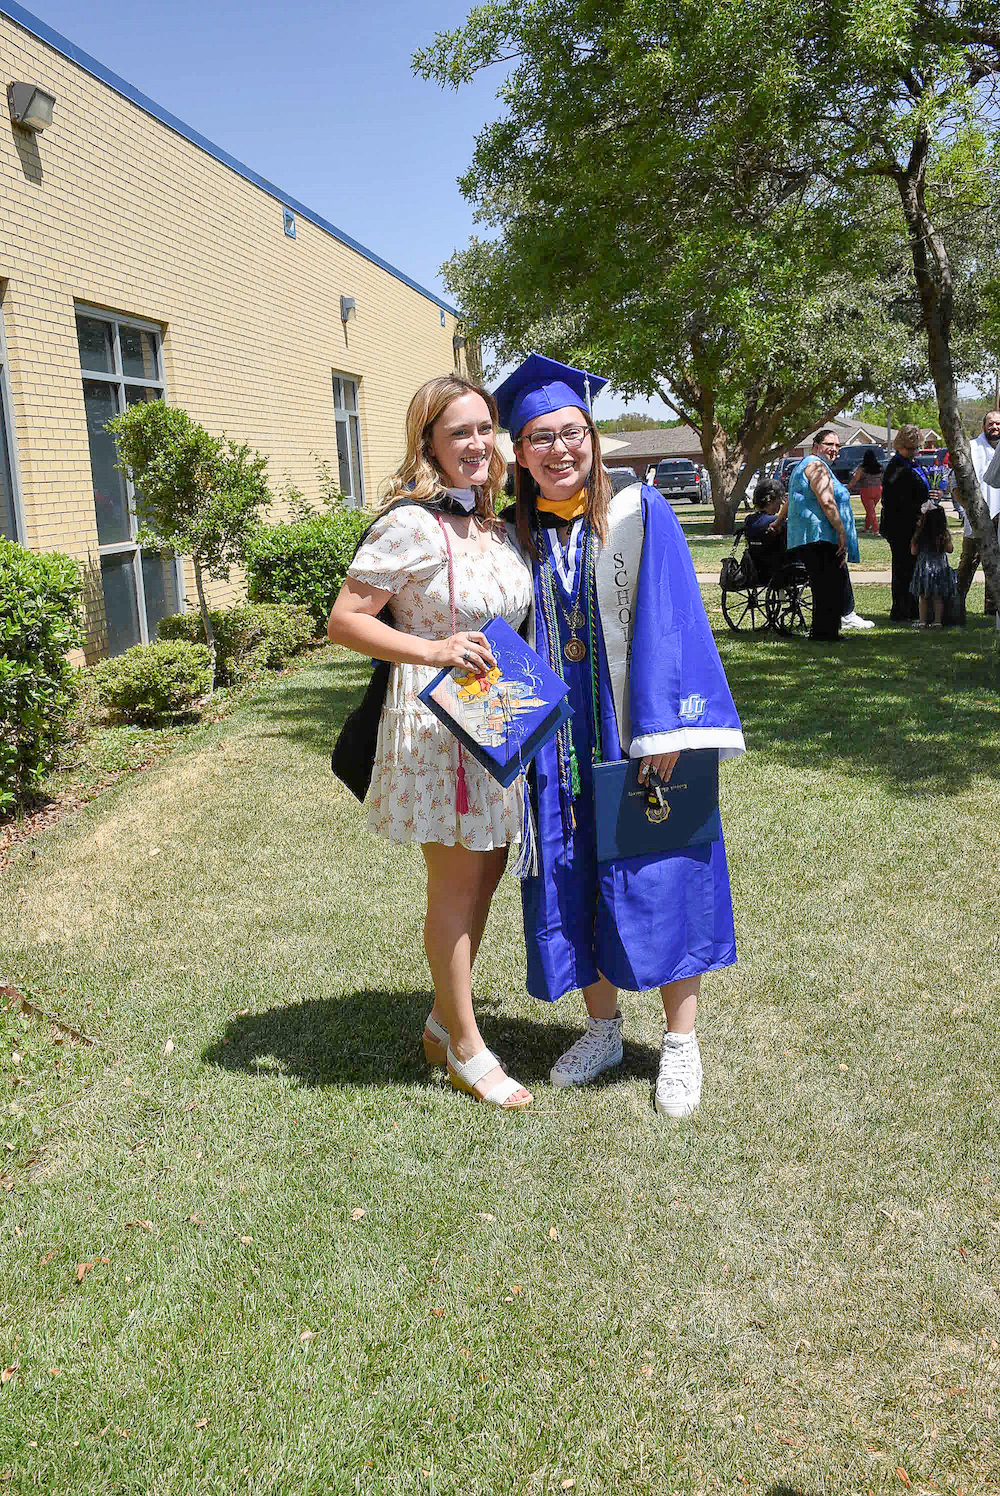 Nicole celebrates graduating from LCU with a friend